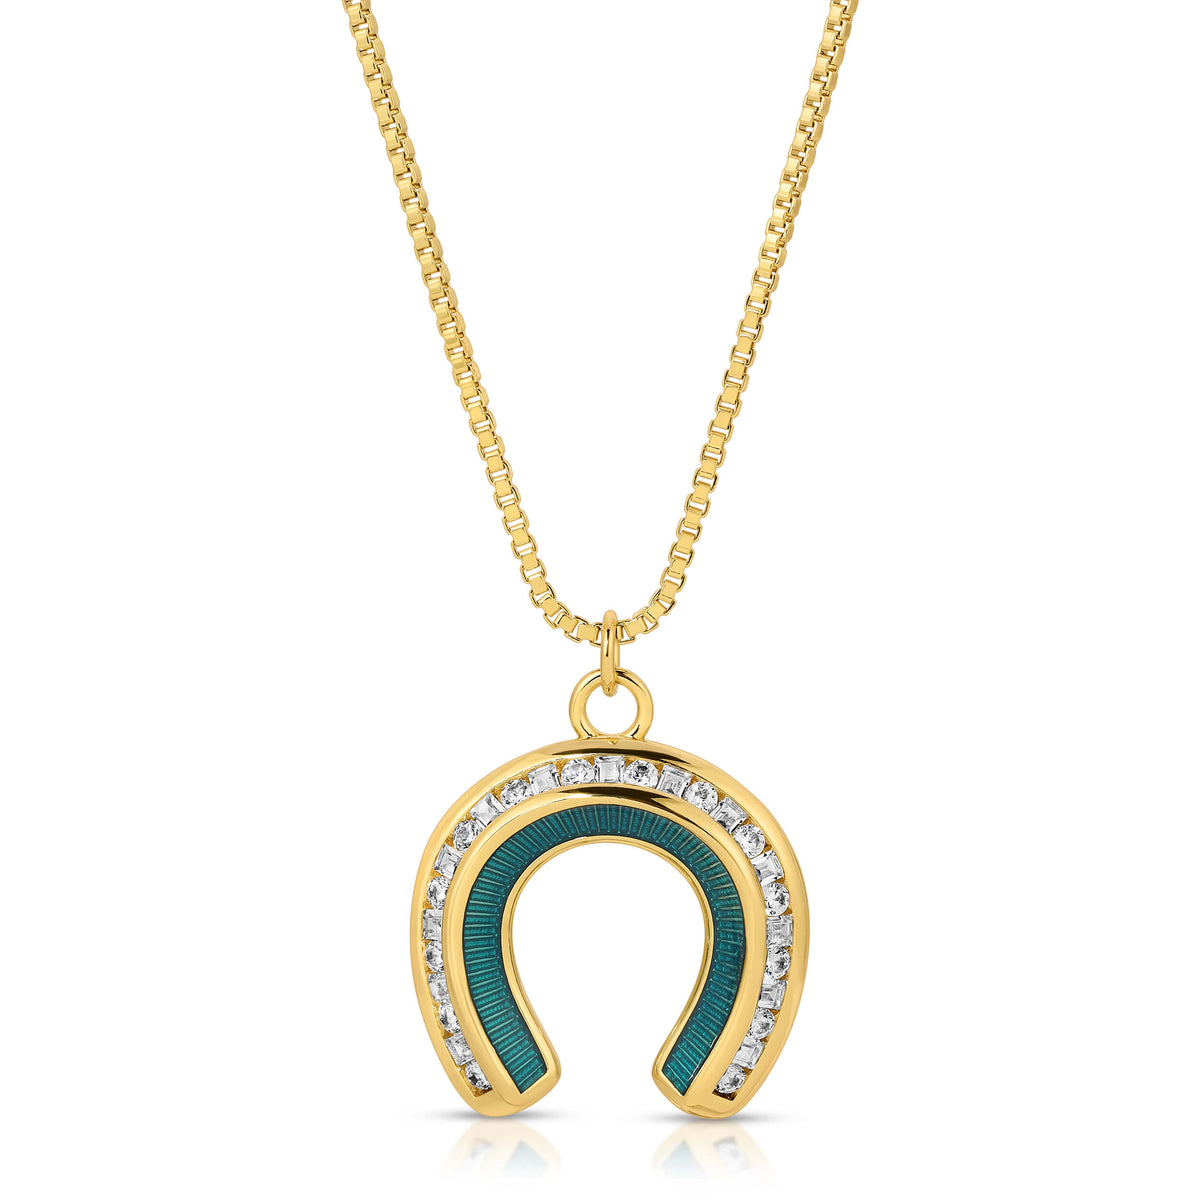 Good Fortune Horseshoe Necklace- Teal